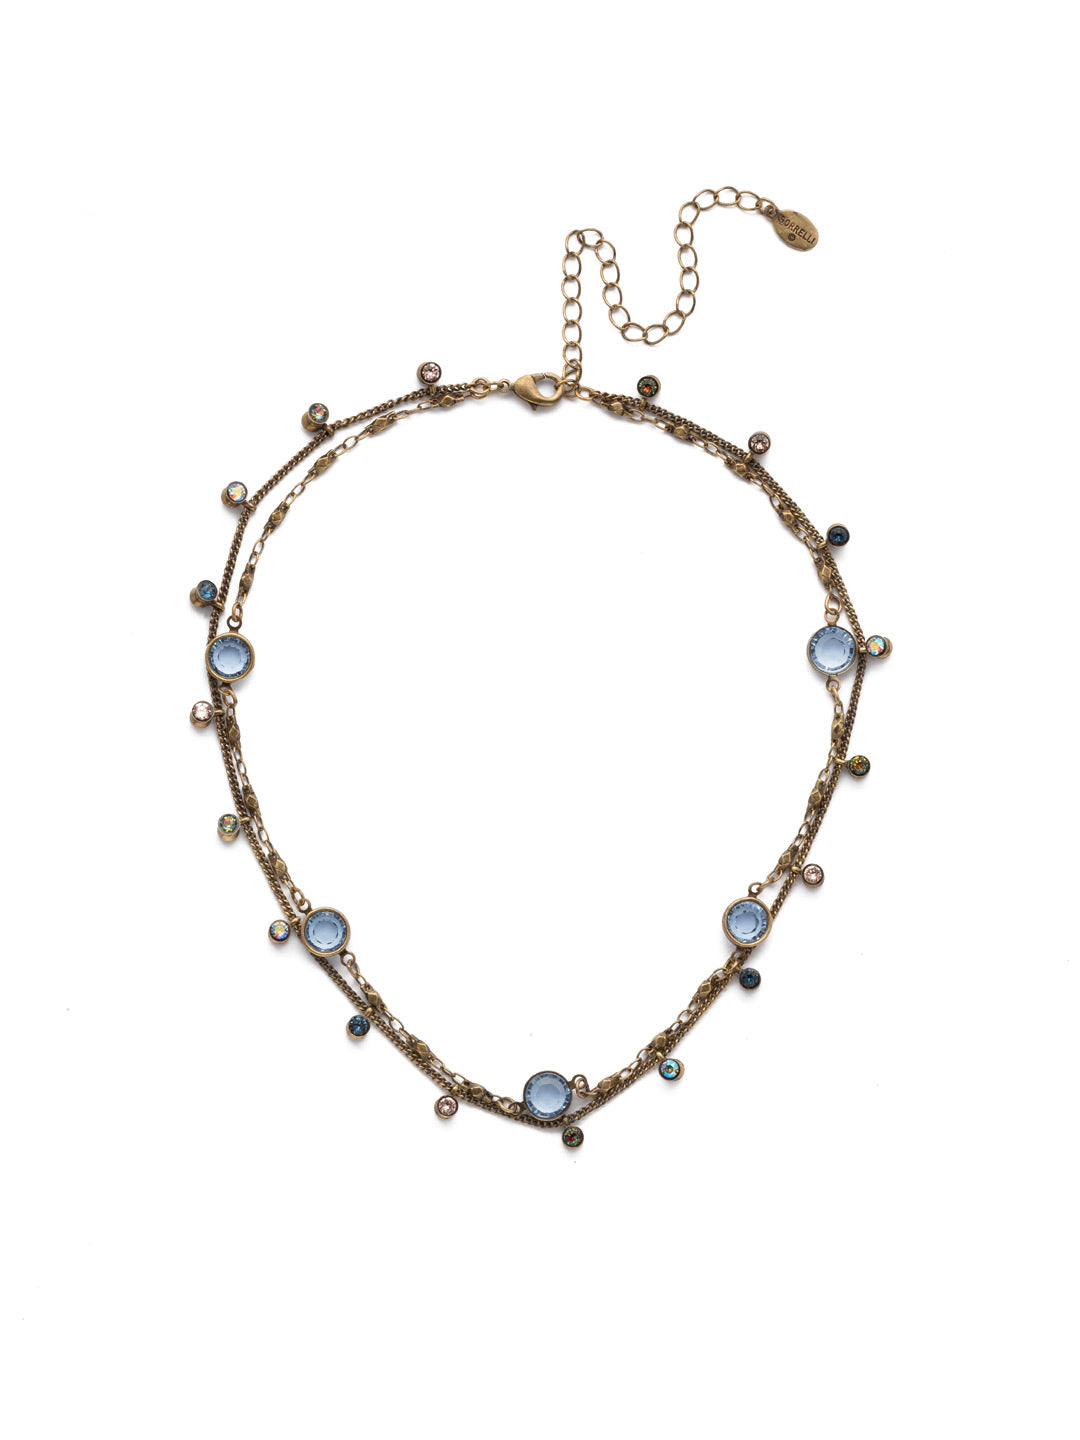 Dewdrop Layered Necklace - NEK36AGSDE - Delicate layers of chain drizzled with droplets of opaque crystals. A quick and easy solution for a layered look with one piece. From Sorrelli's Selvedge Denim collection in our Antique Gold-tone finish.